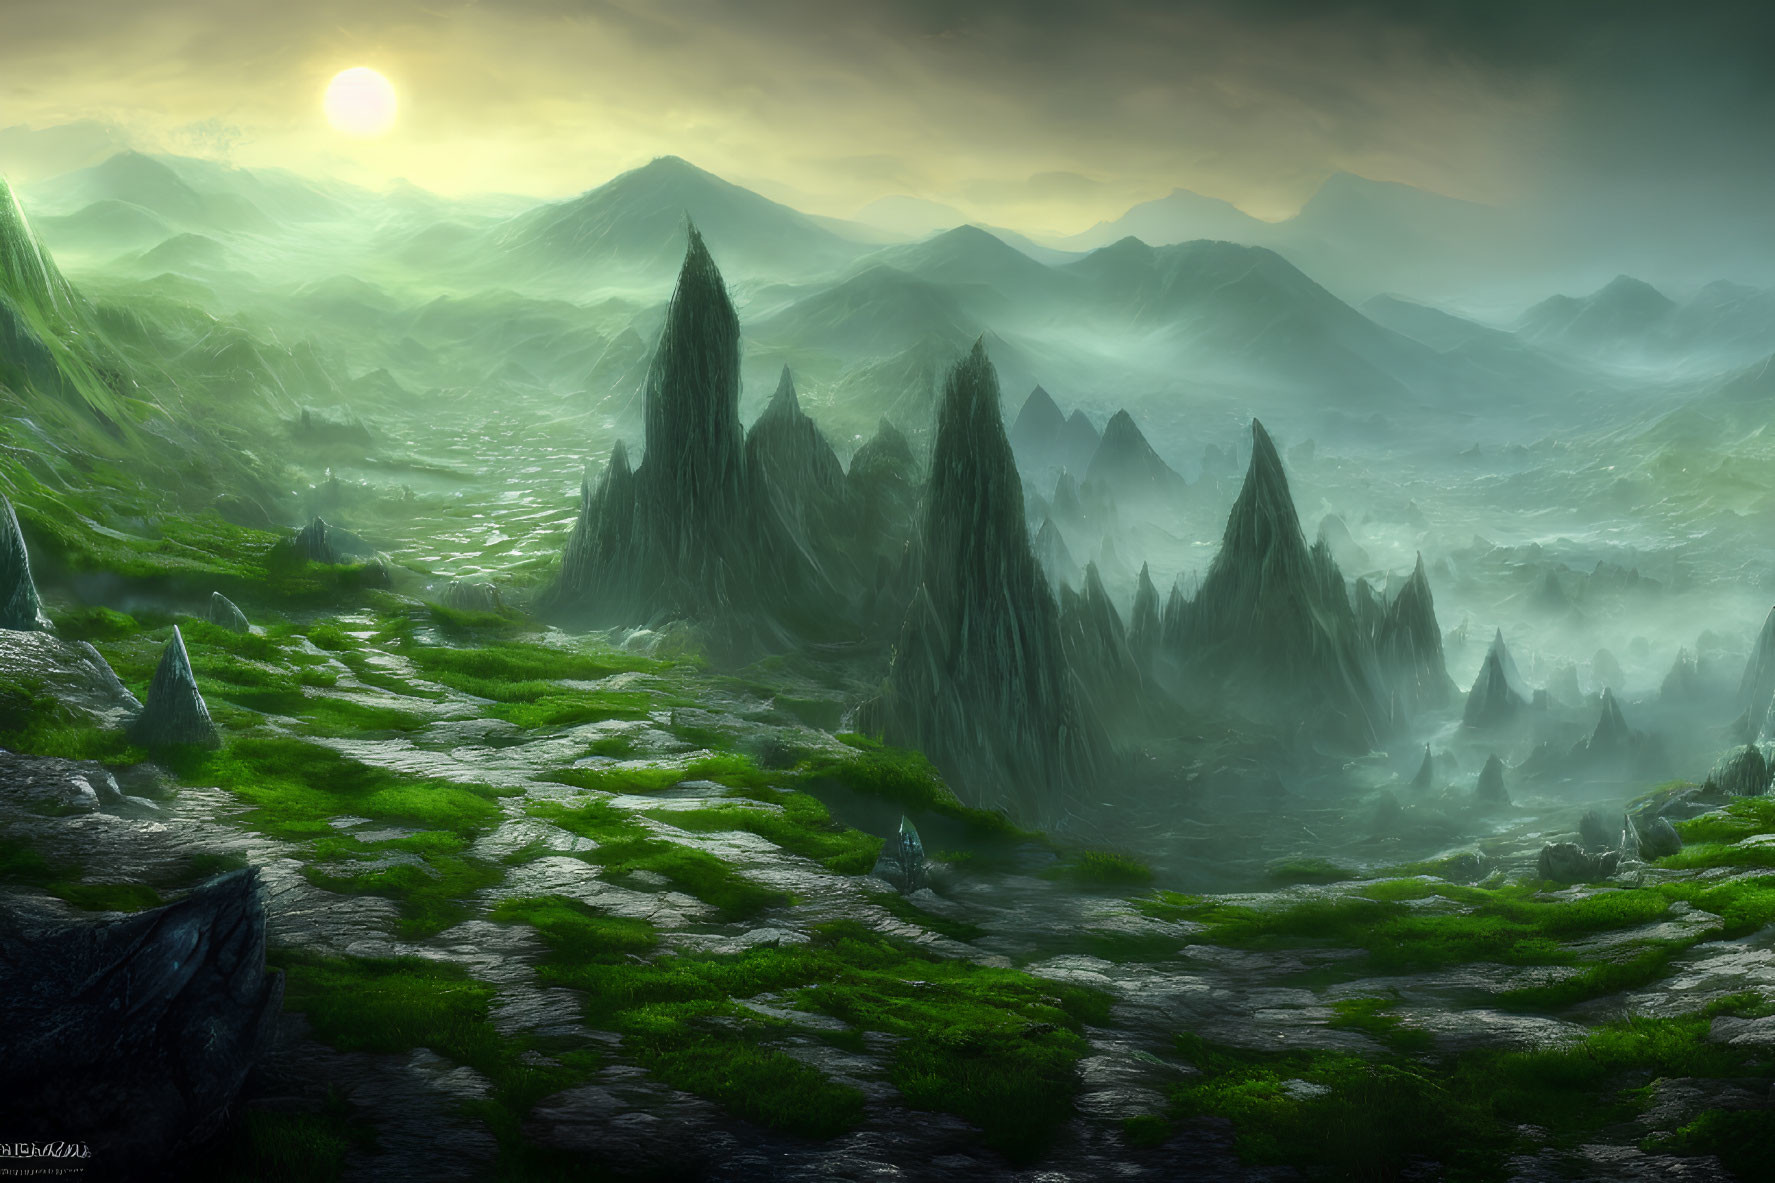 Serene fantasy landscape with lush greenery and towering rock formations